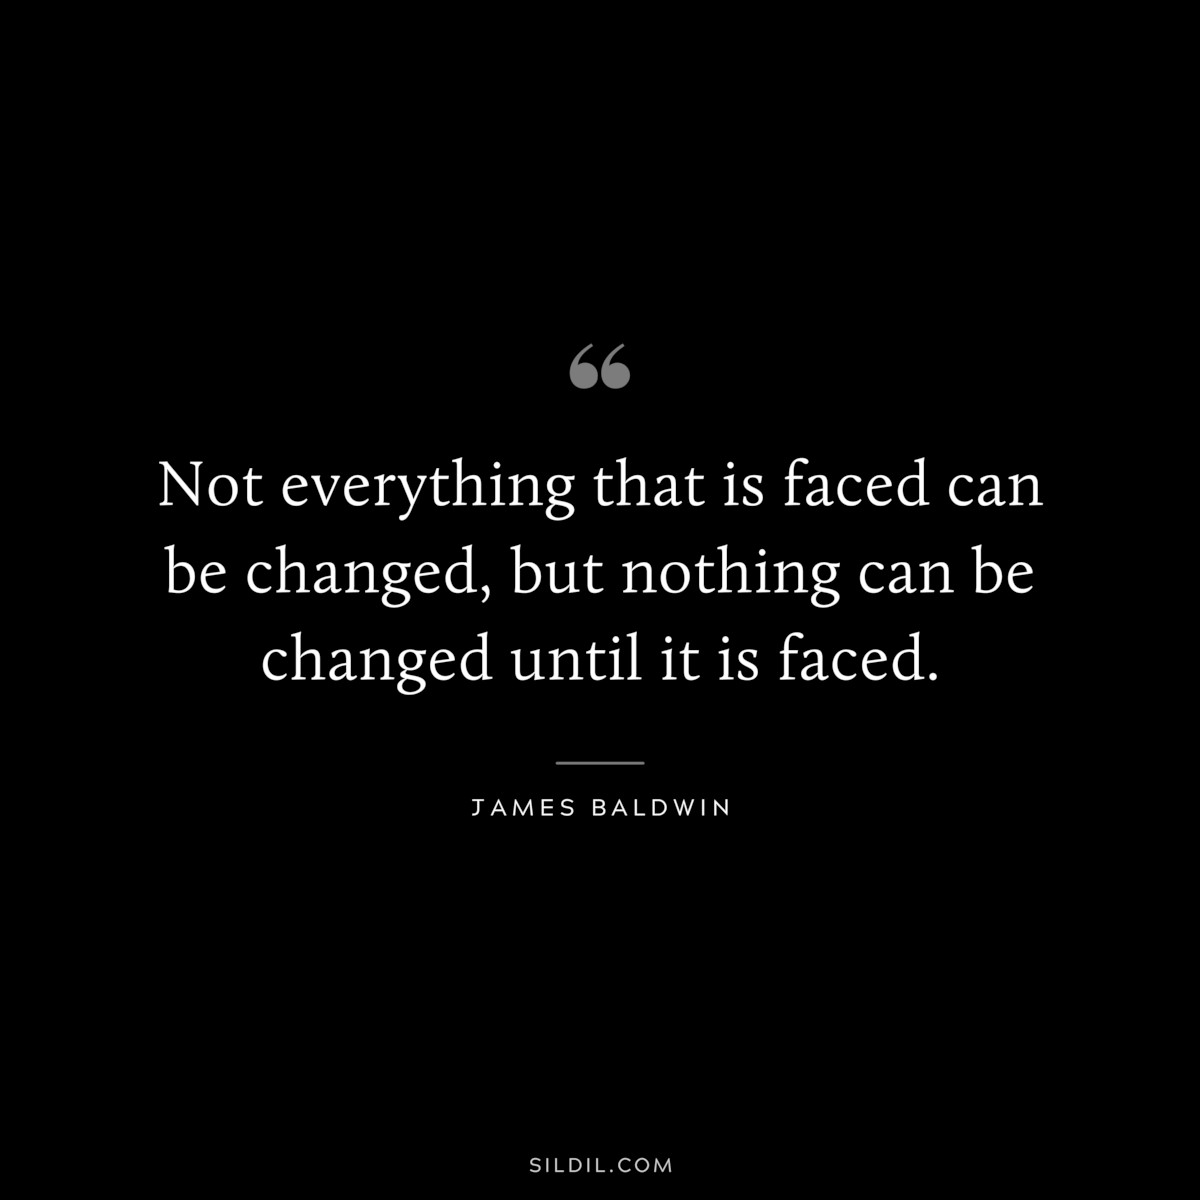 Not everything that is faced can be changed, but nothing can be changed until it is faced. ― James Baldwin